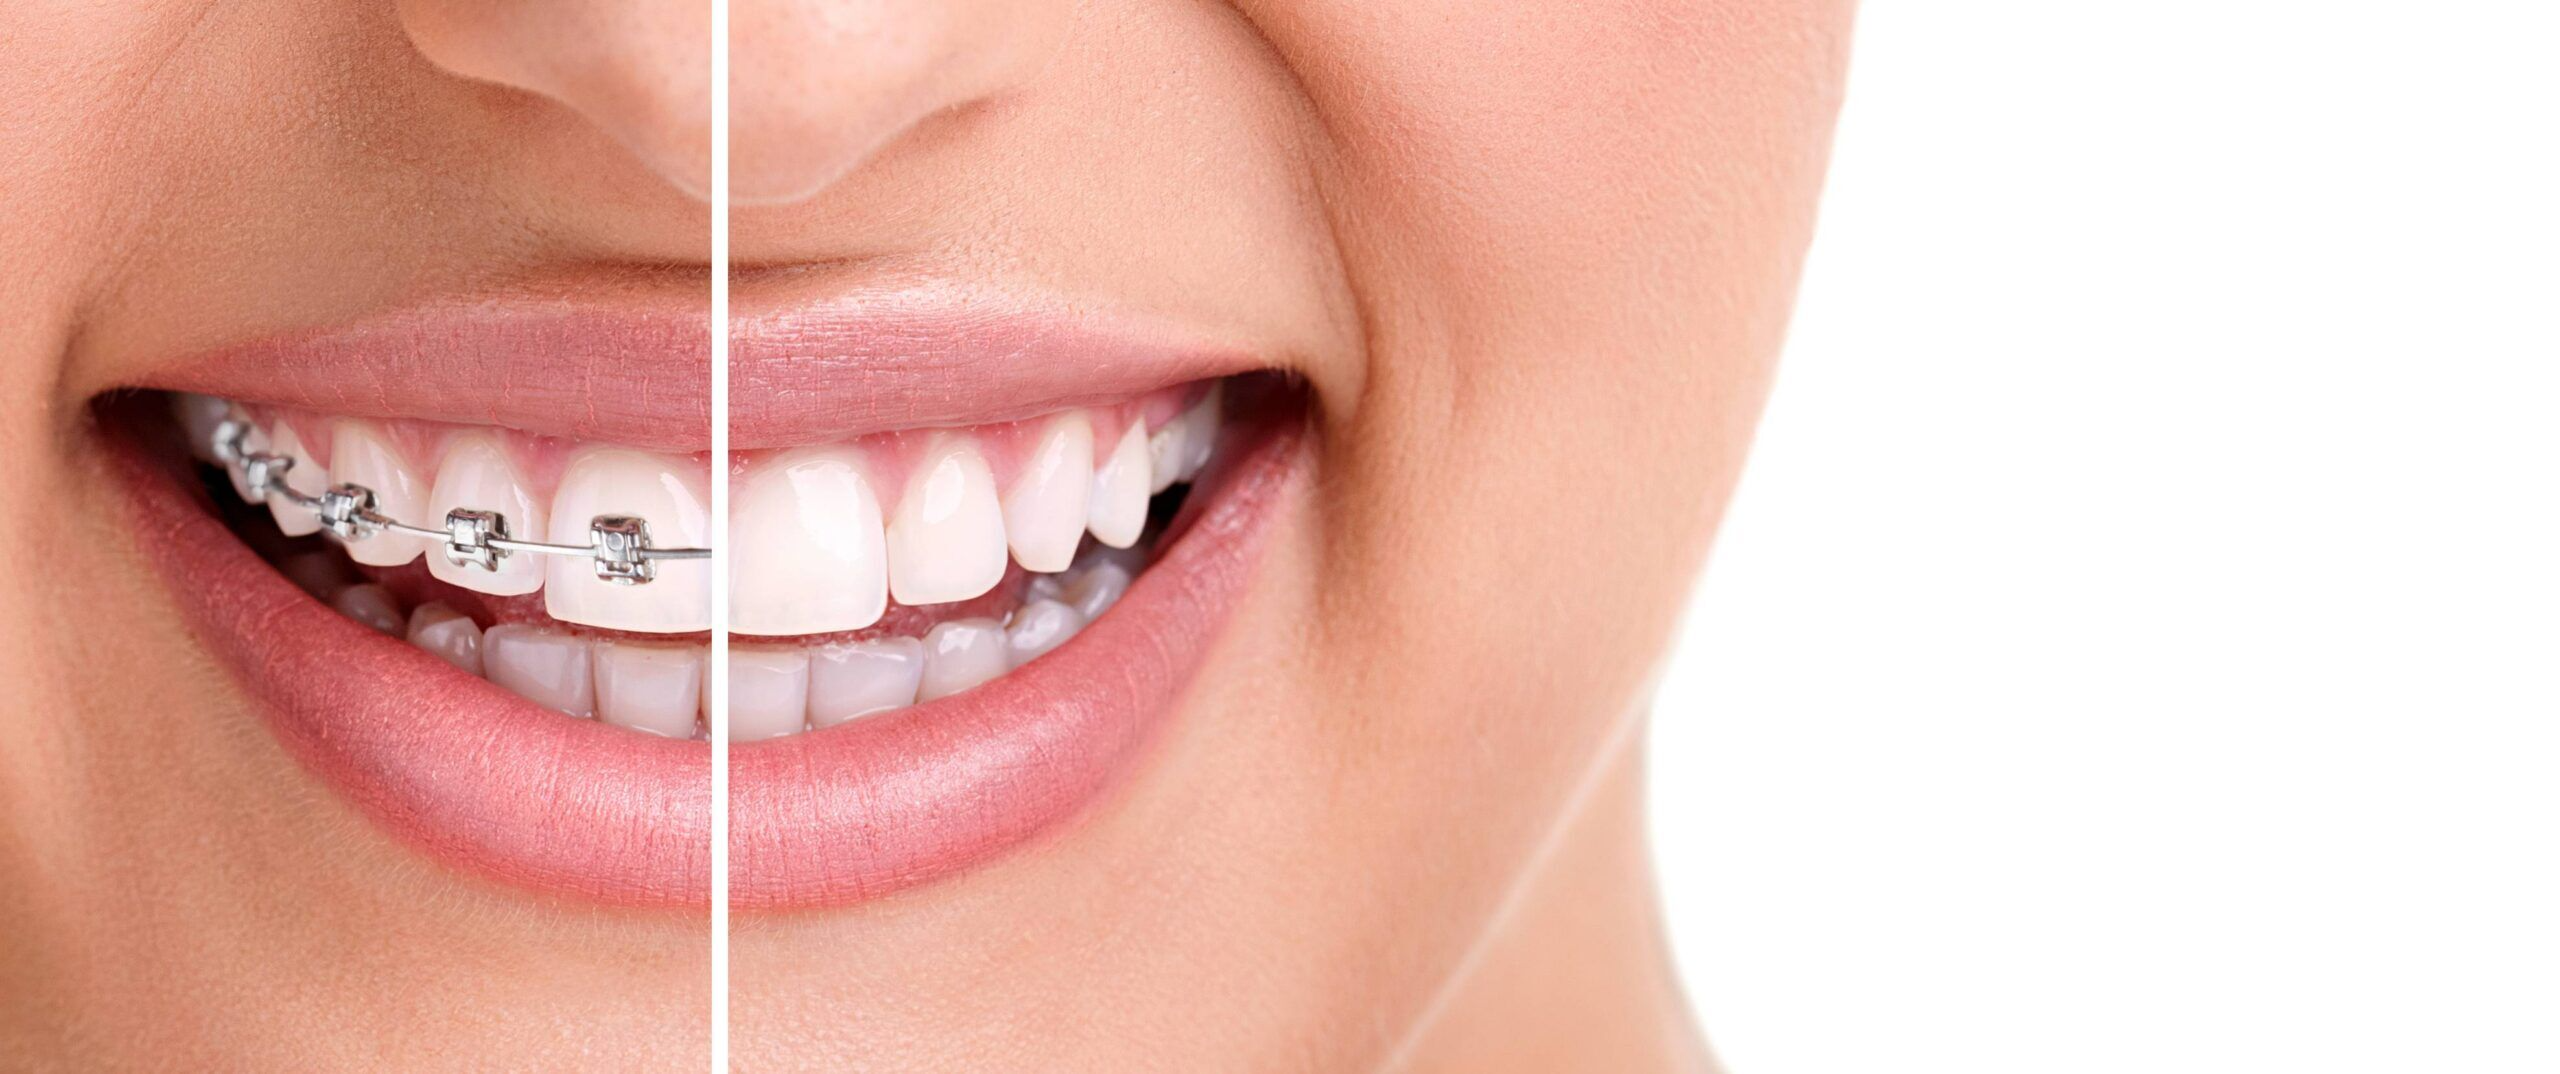 Customized Orthodontic Treatment Solutions For Your Smile